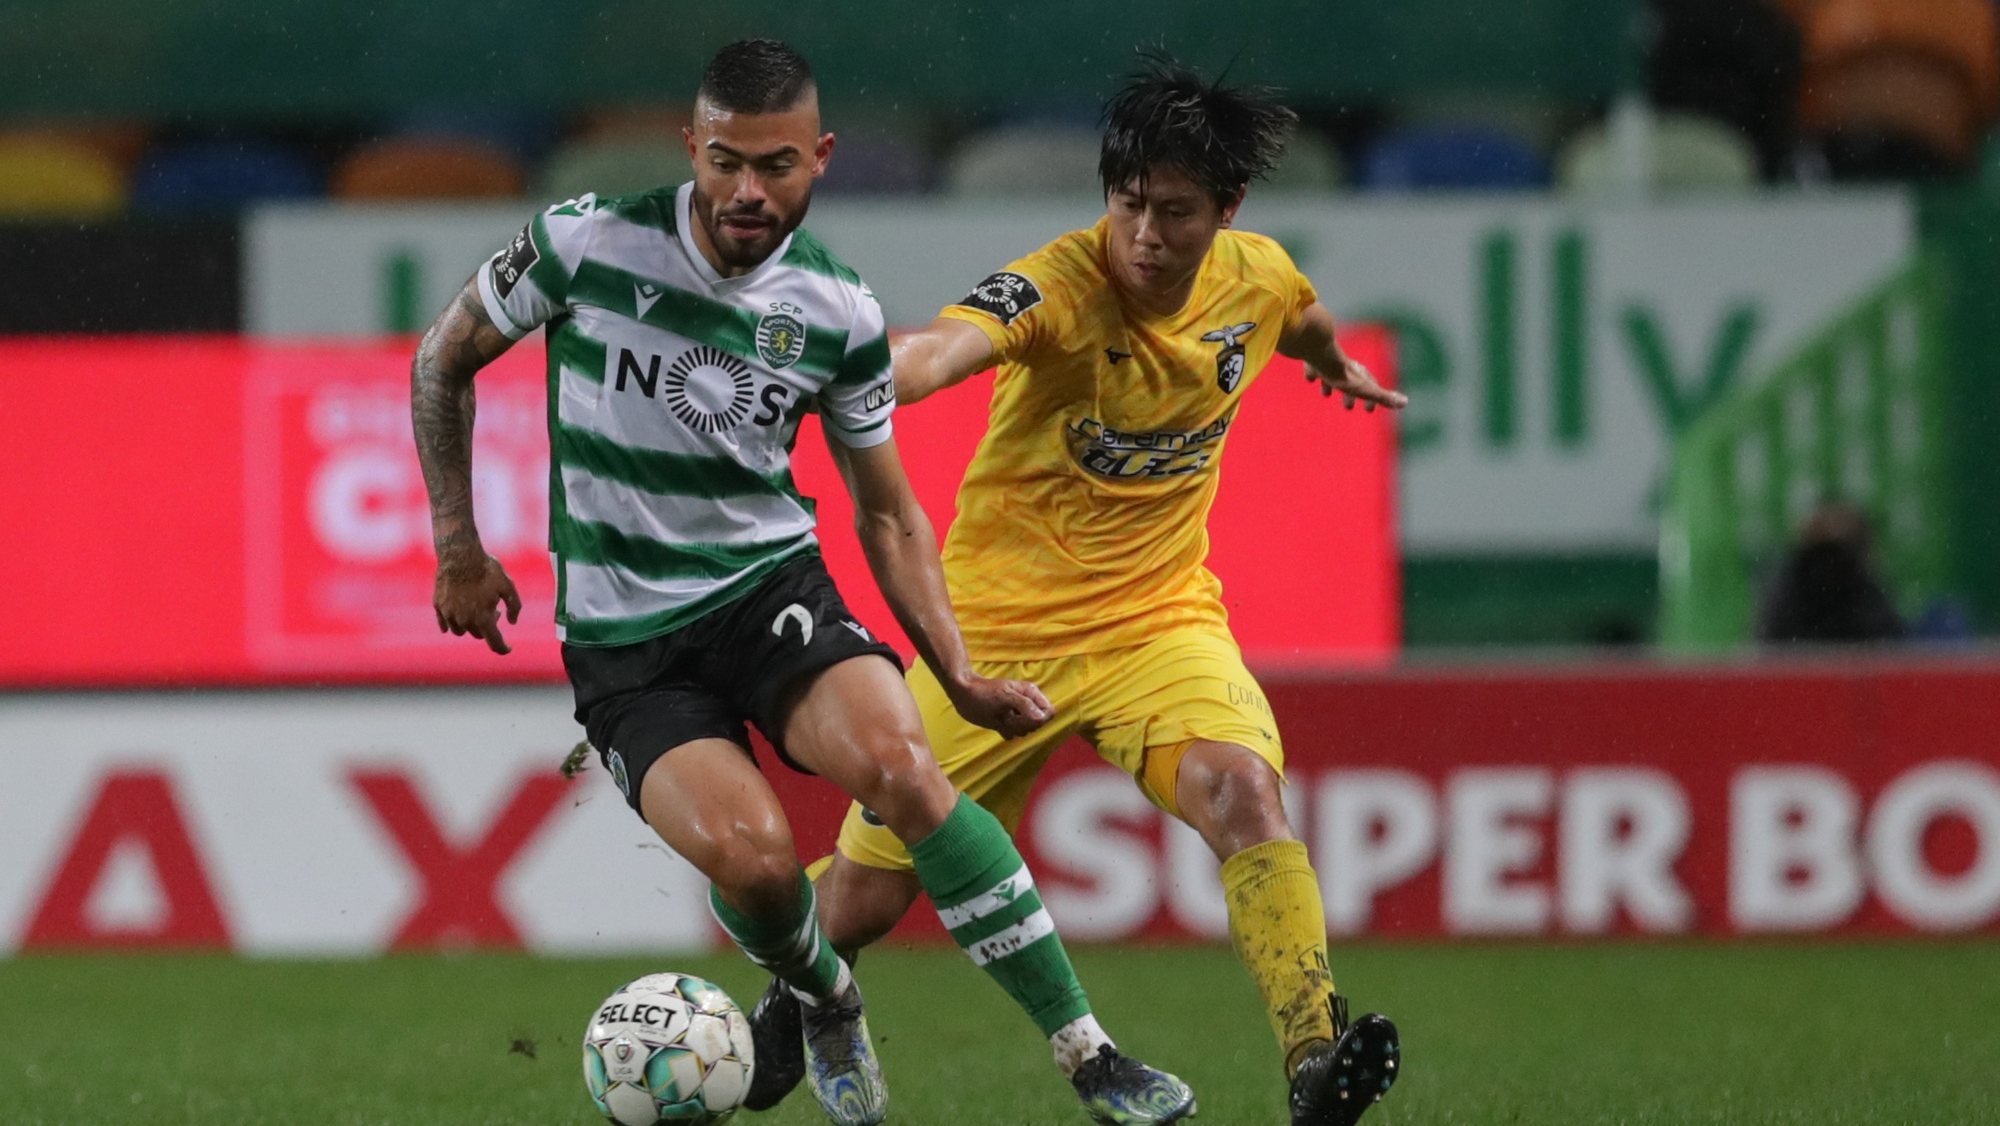 Sporting&#039;s player Bruno Tabata (L) in action against Portimonense&#039;s player Koki Anzai (R) during the Portuguese First League soccer match, Sporting vs Portimonense, held at Alvalade stadium in Lisbon, Portugal, 20 February 2021. TIAGO PETINGA/LUSA